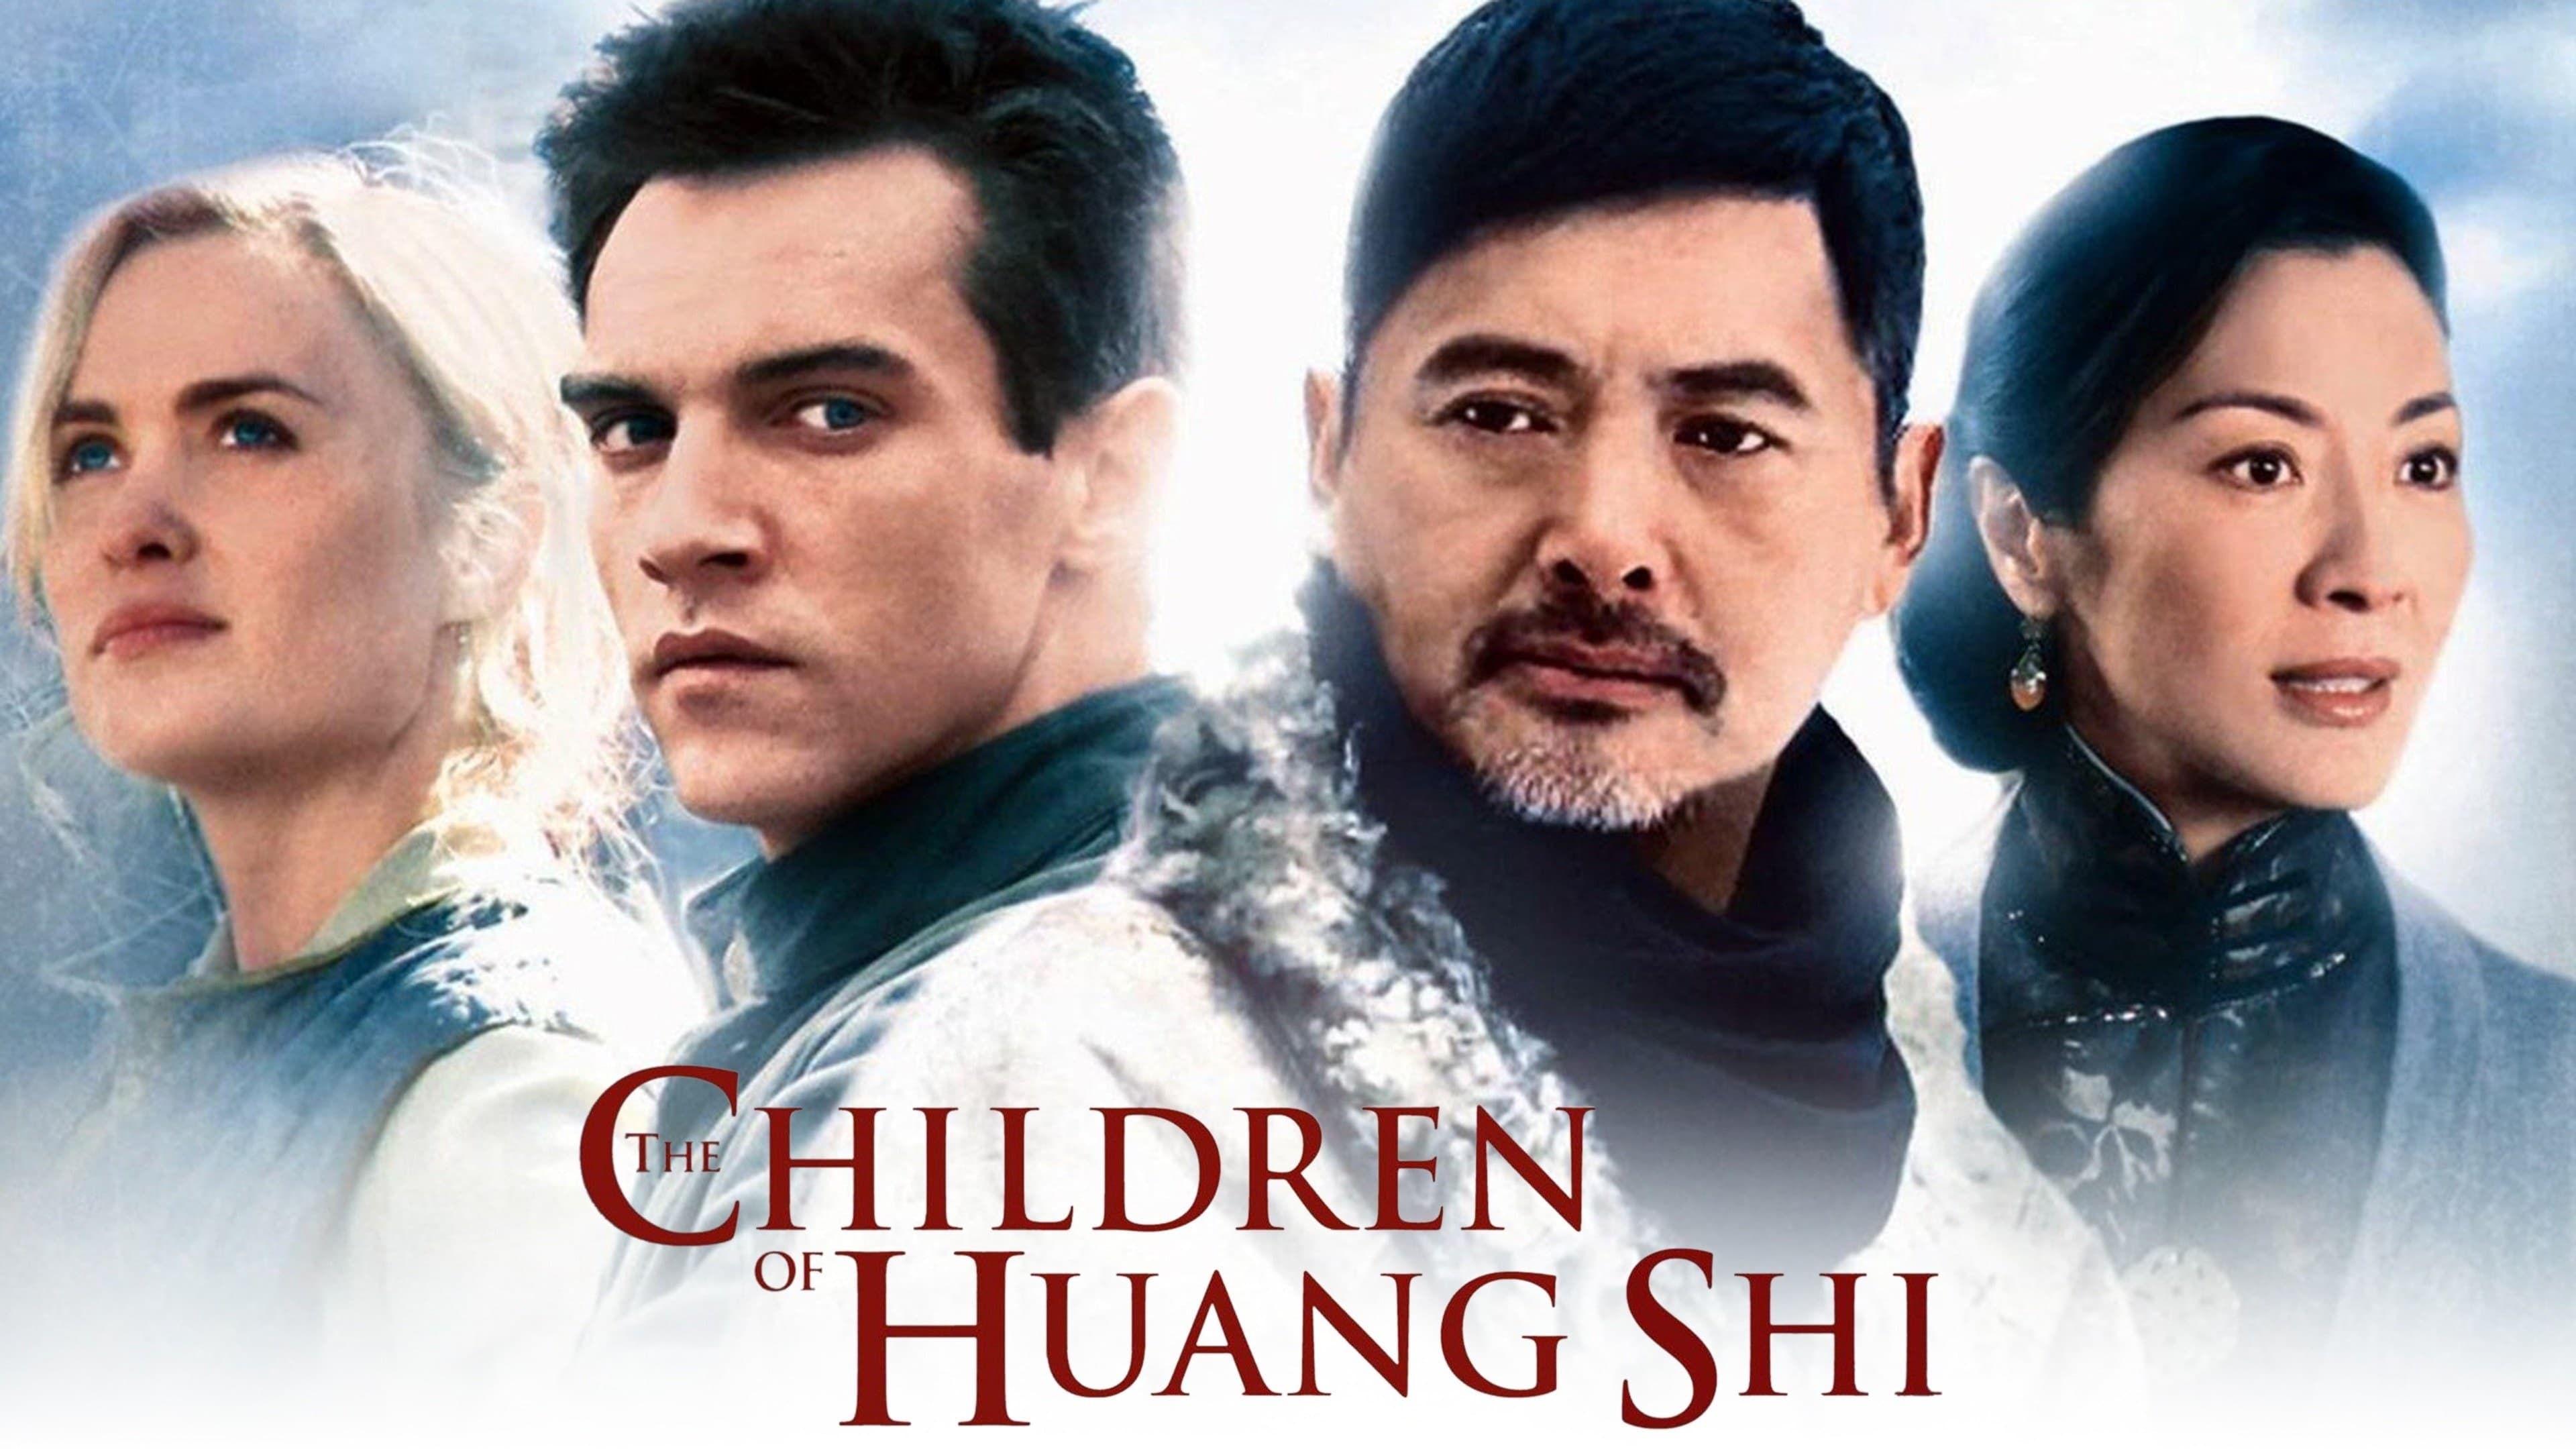 Escape from Huang Shi